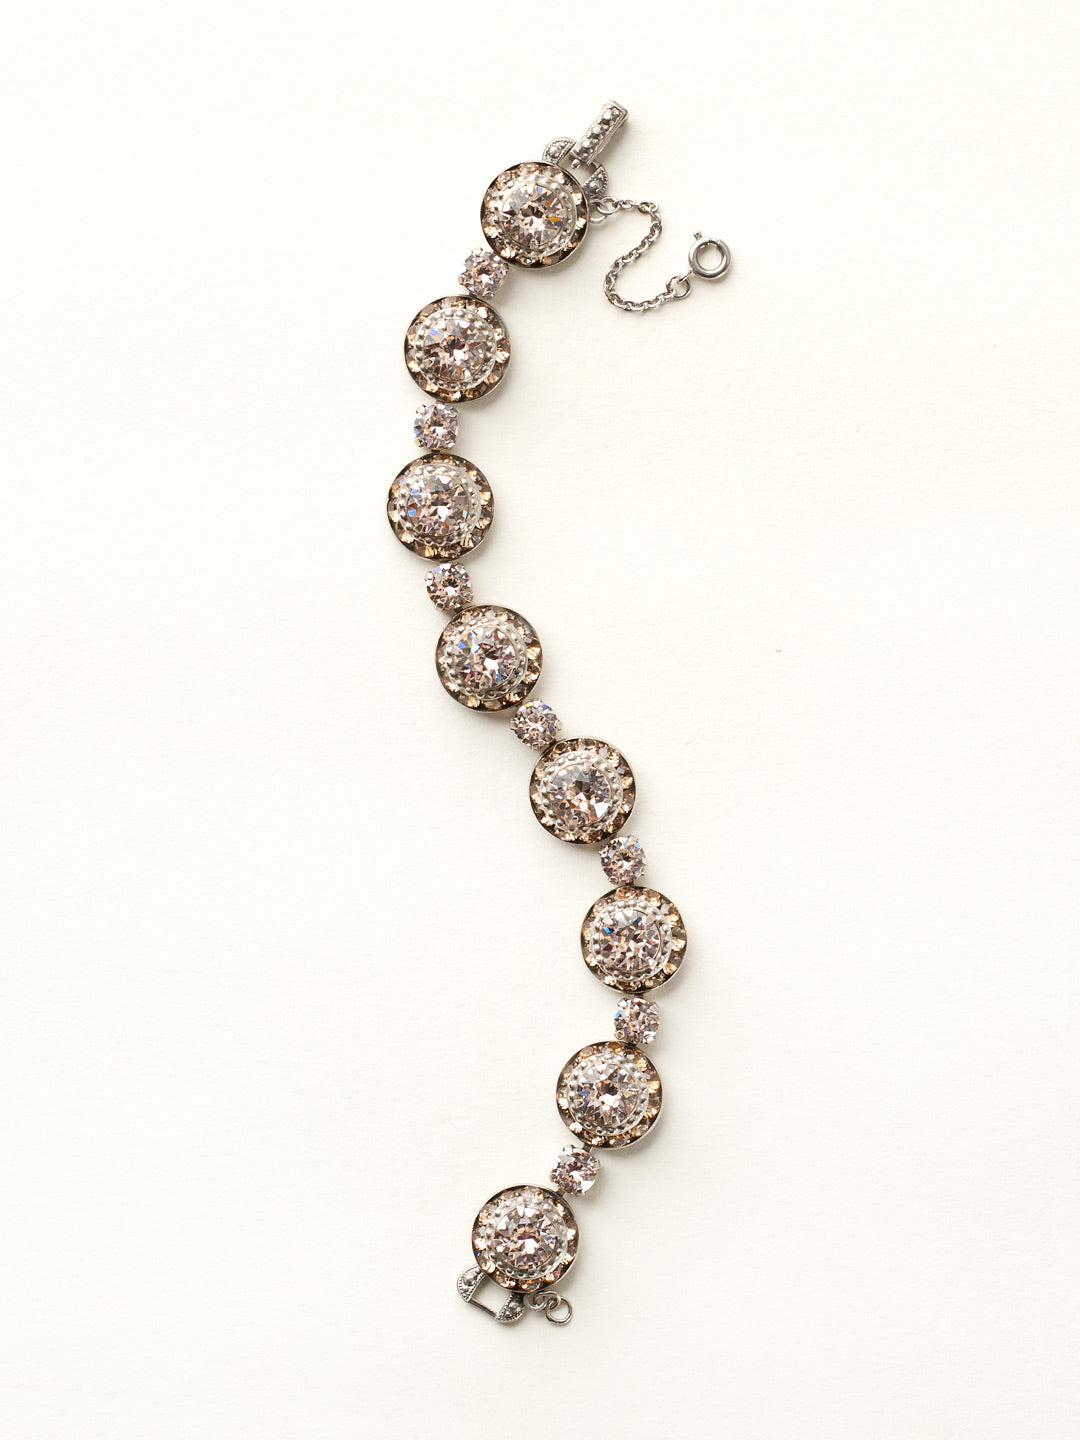 Dynamic Round Setting Line Bracelet - BCZ8ASSBL - Gorgeous and glimmering! This lavish line bracelet features an embellished setting decorated with both large and petite round crystals.